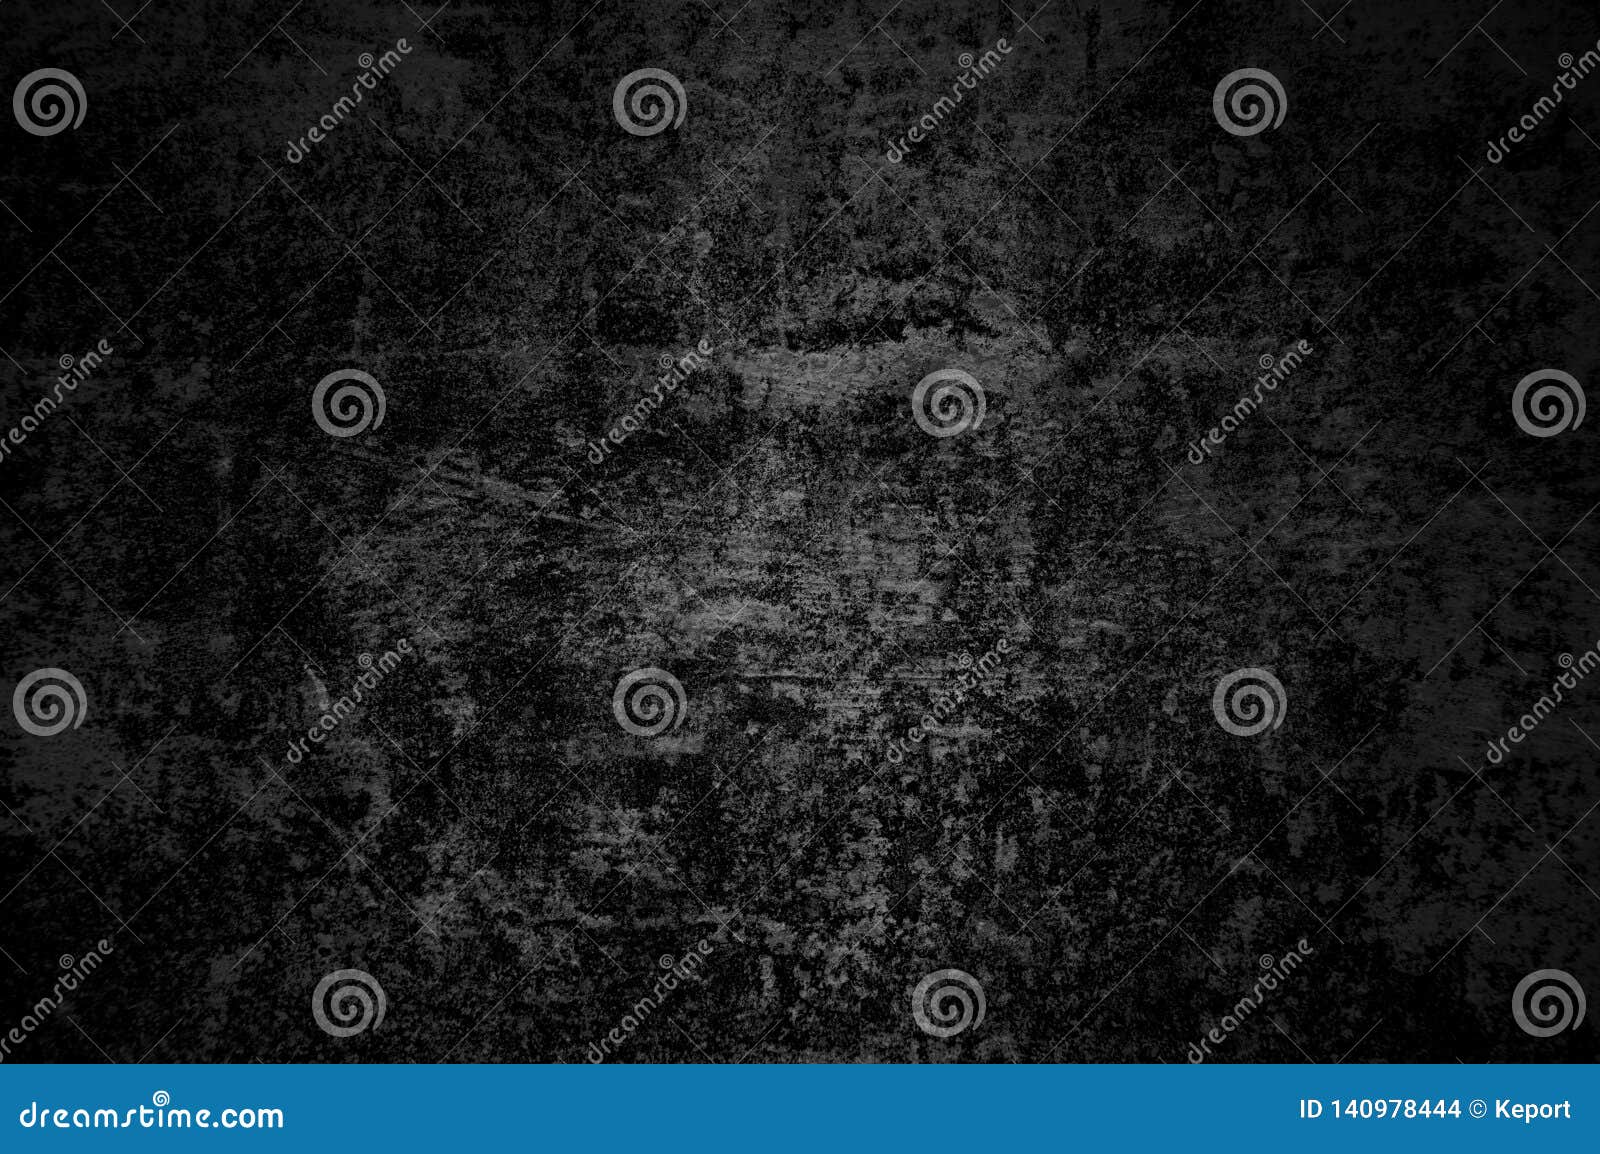 dirty black grunge background texture with scratches